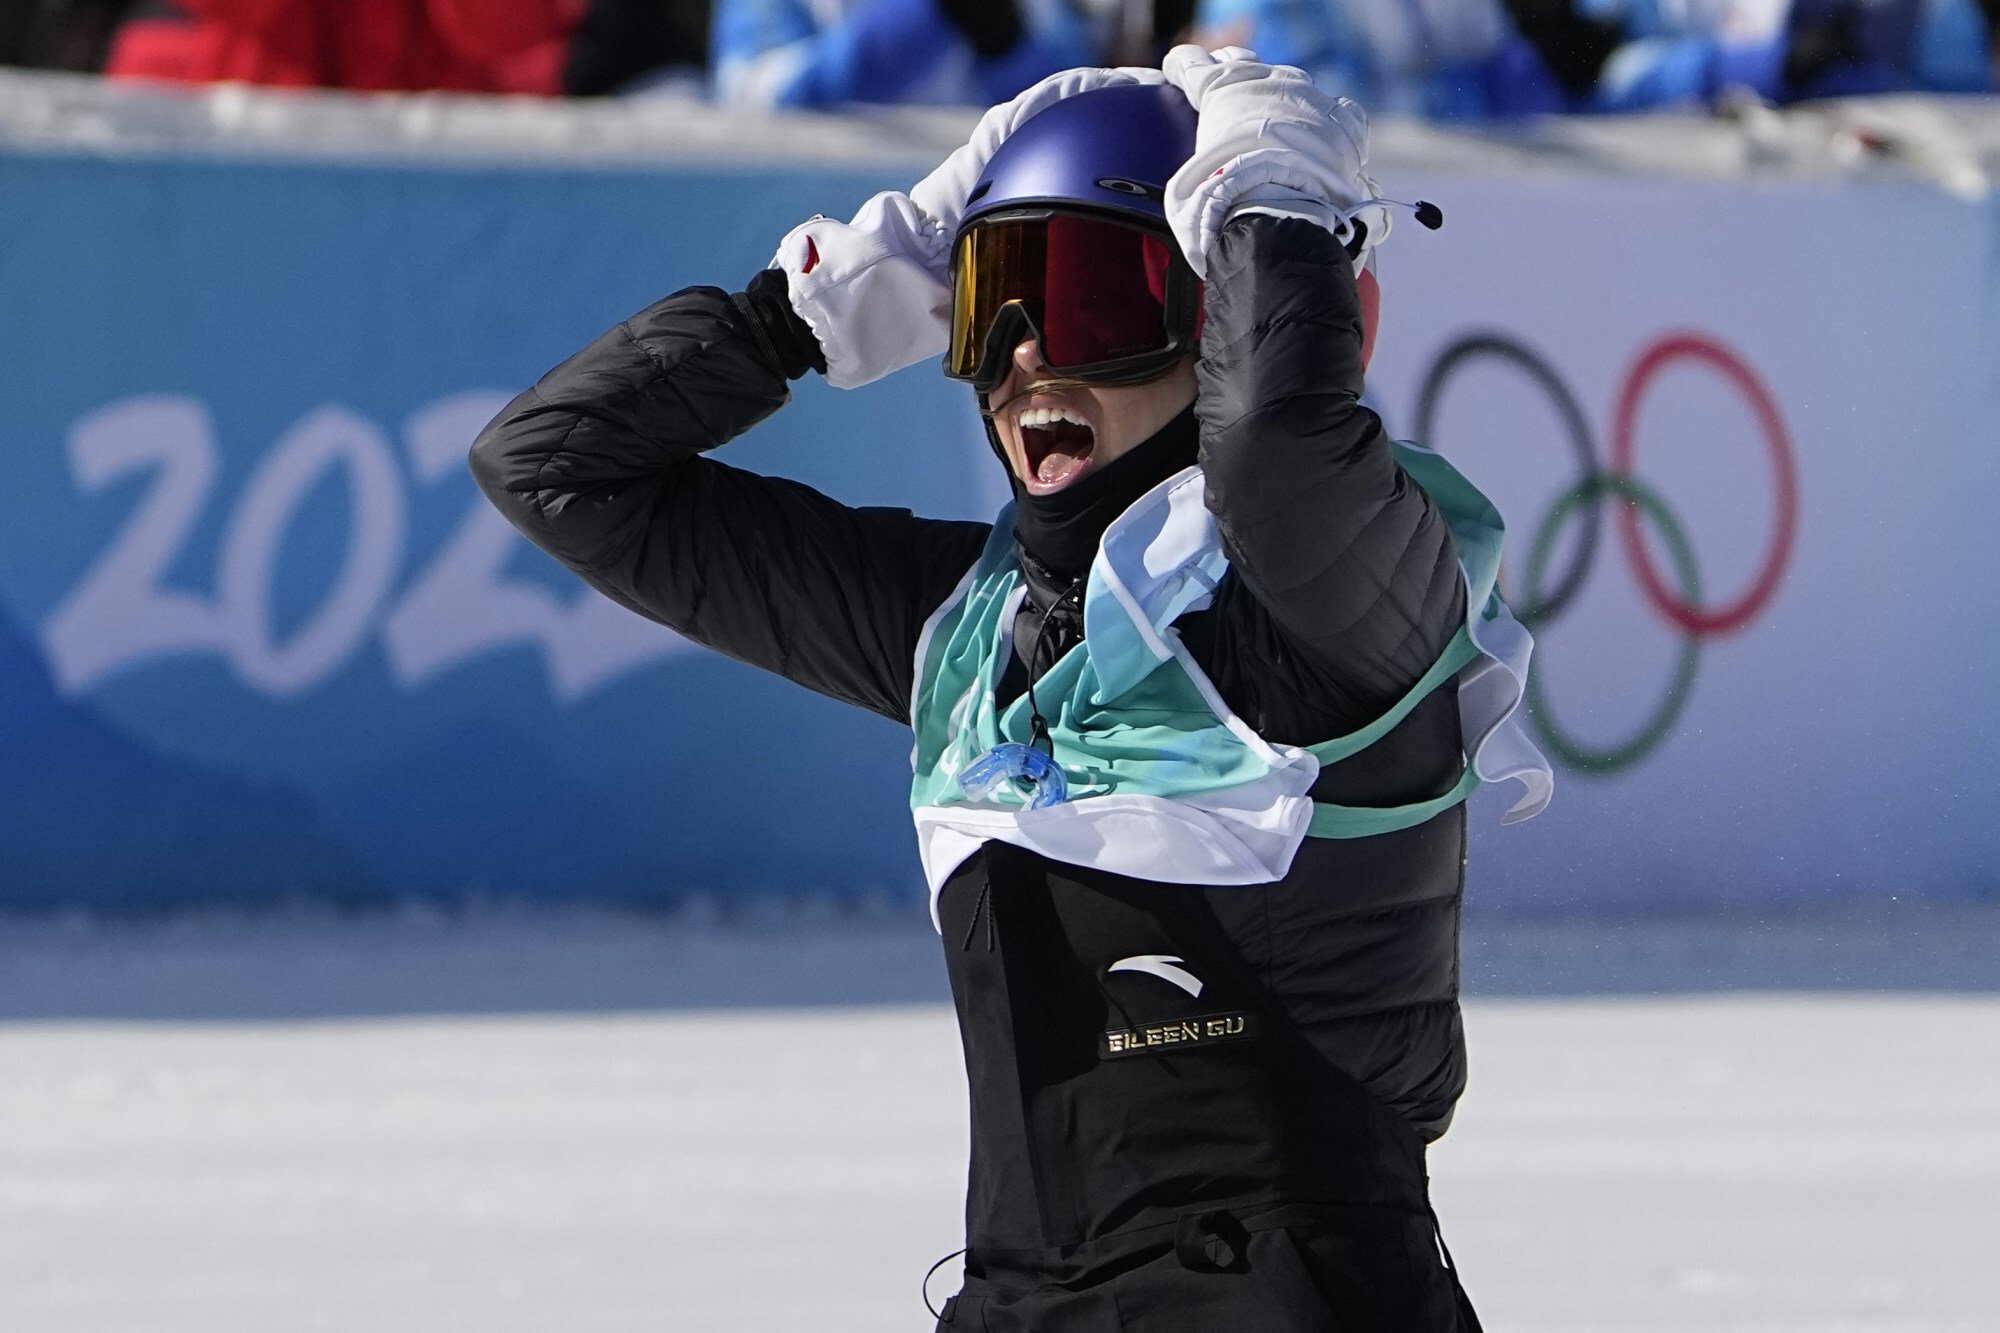 Gold medallist Eileen Gu, of China, reacts after her final run in the women’s freestyle skiing big air finals of the 2022 Winter Olympics, Tuesday, Feb. 8, 2022, in Beijing. Photo: AP